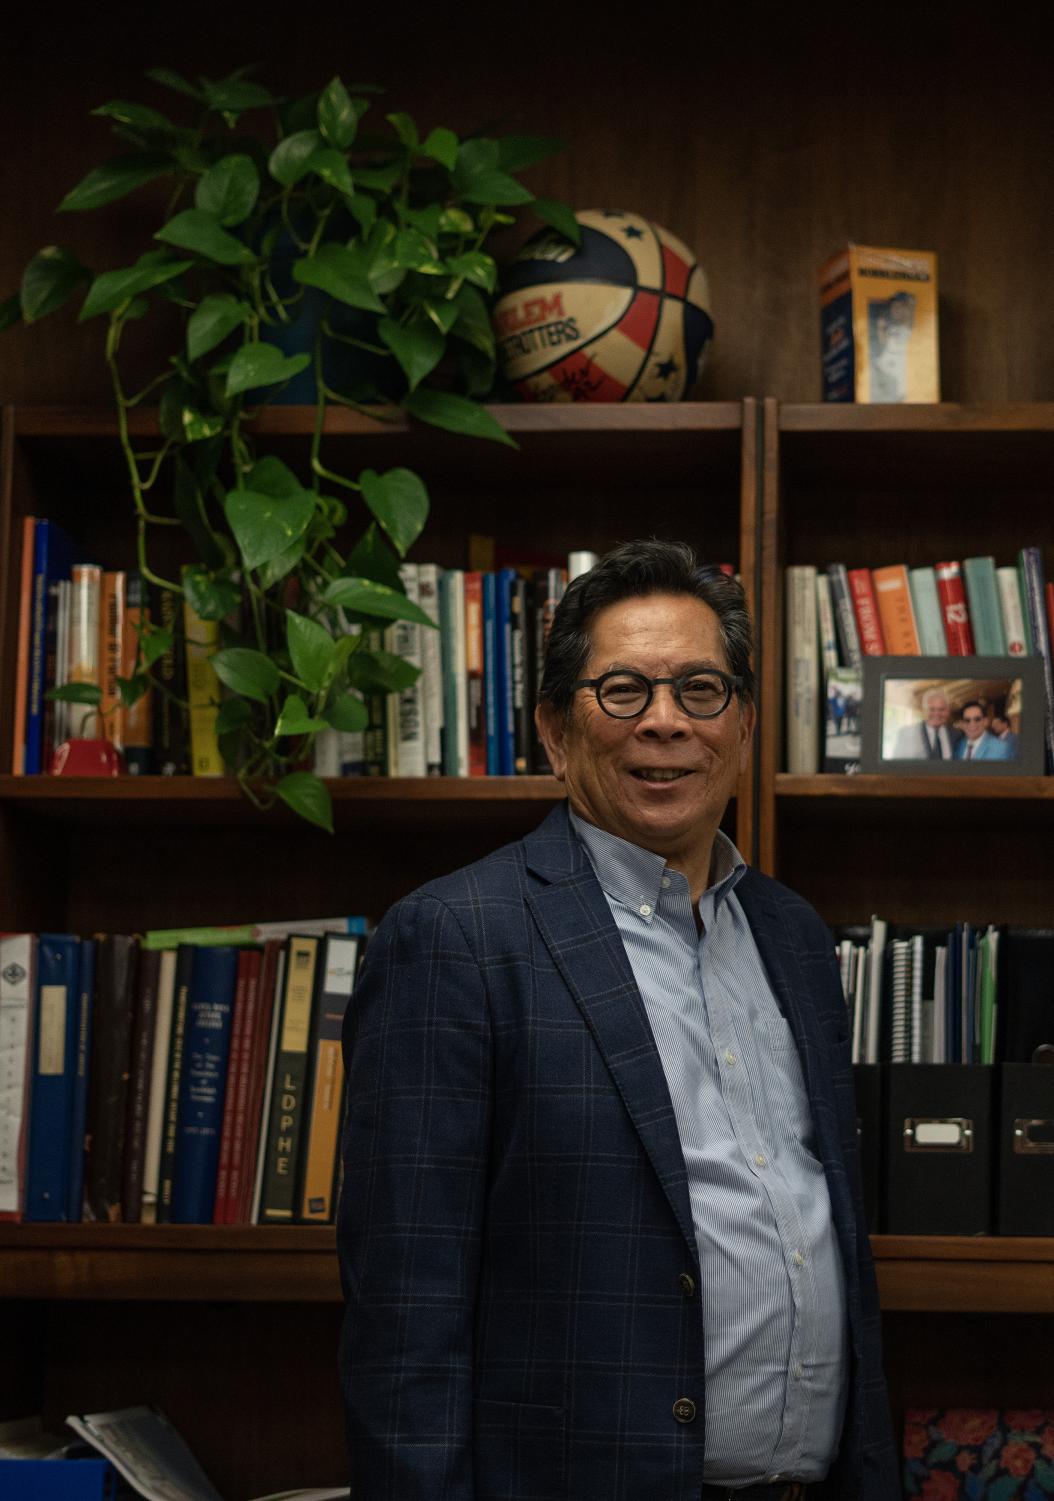 As SRJC’s first president of color, Dr. Chong feels he came to the right place at the right time, when the community was starting to change. He arrived
with plans to make Latino, first-generation, homeless, LGBTQIA+ and veteran students feel indispensable to the college community.